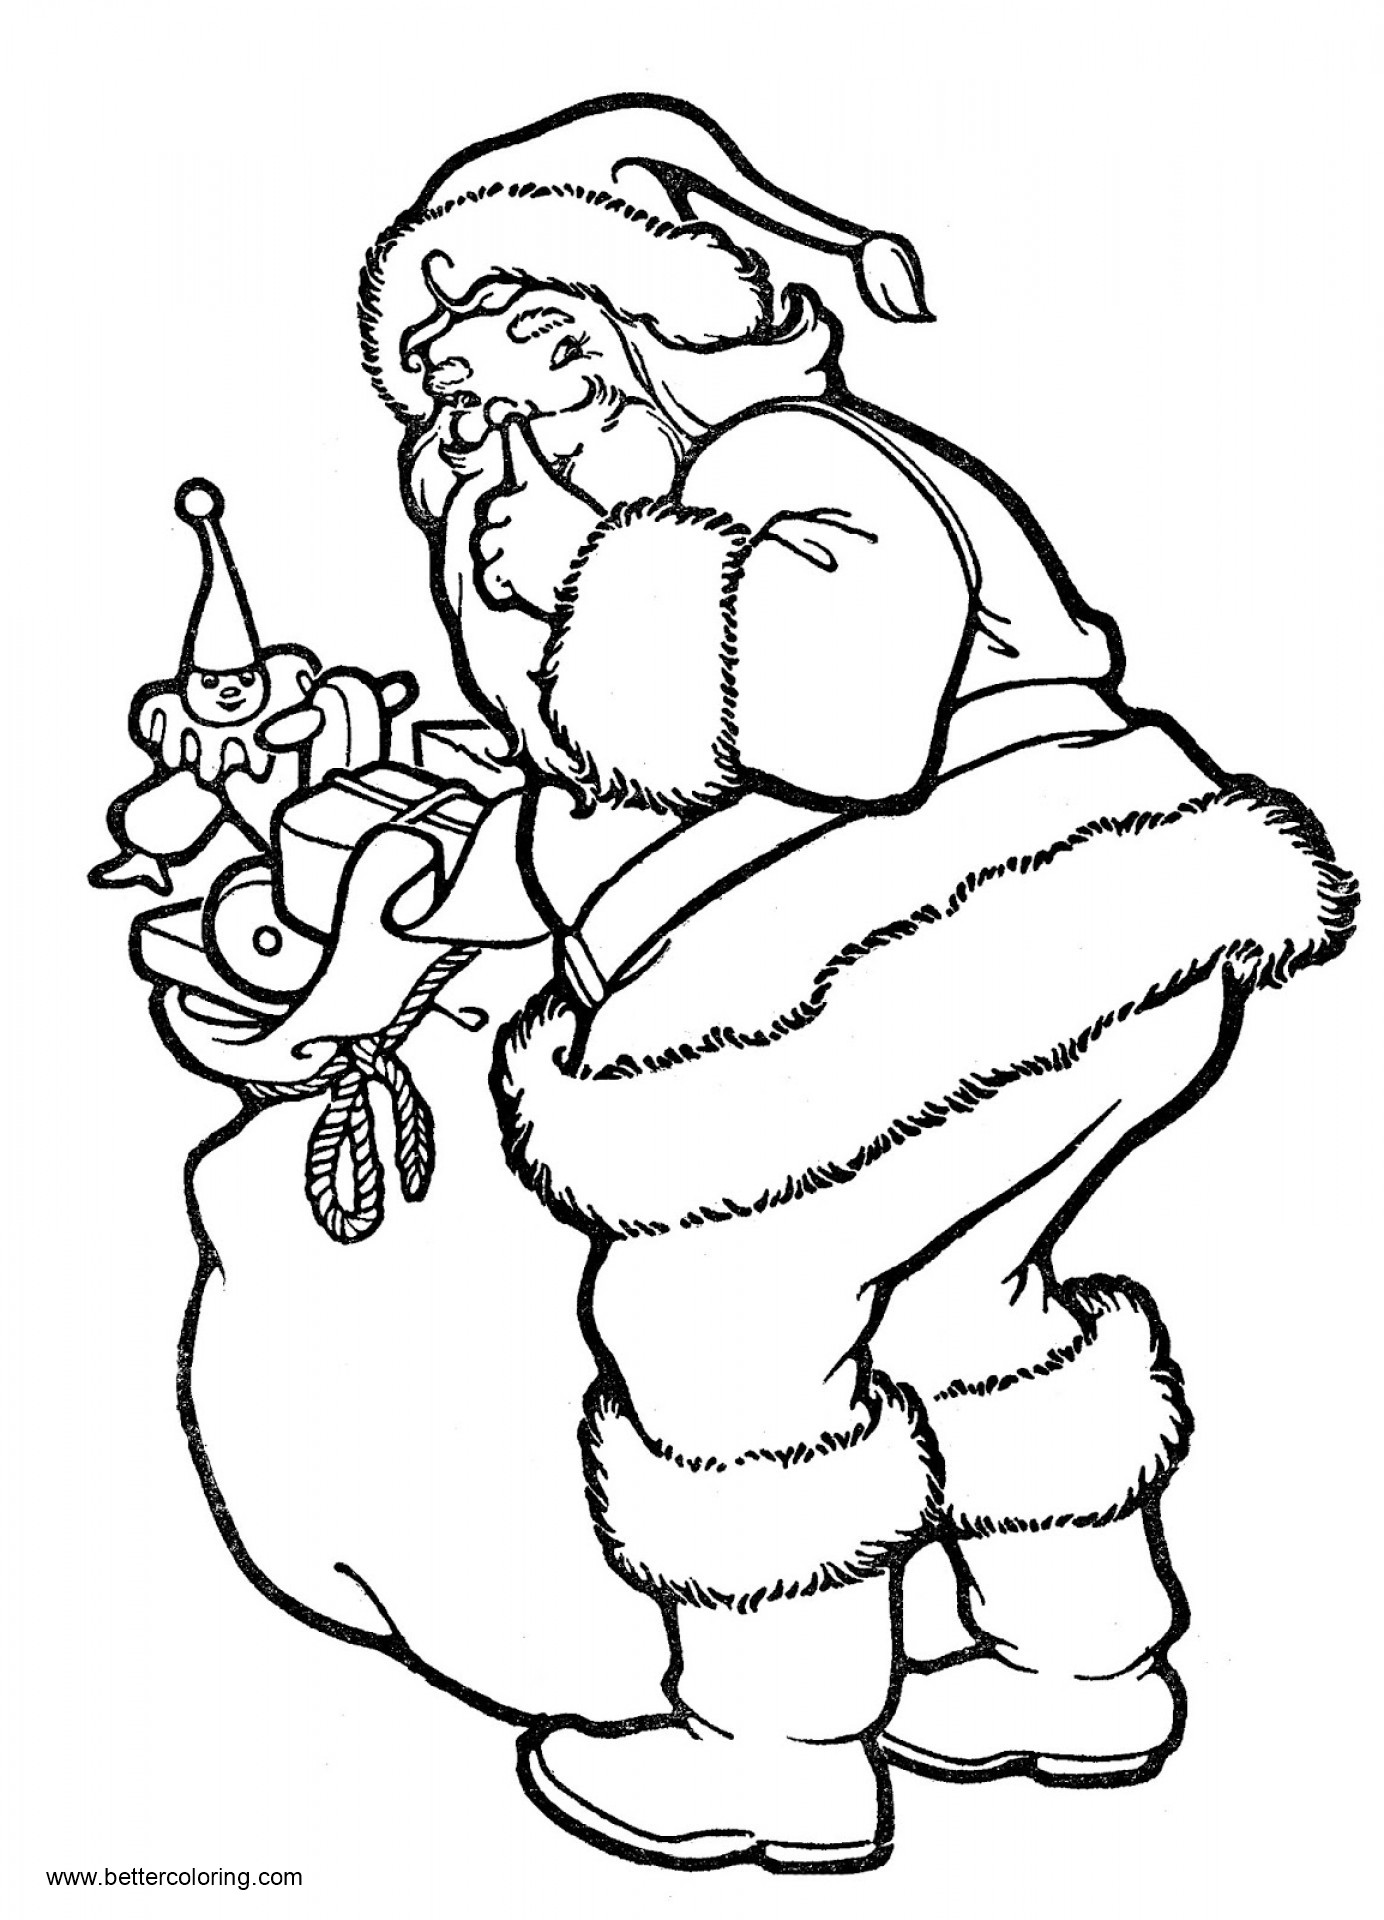 free christmas coloring sheets easy Simple christmas coloring pages at getcolorings.com